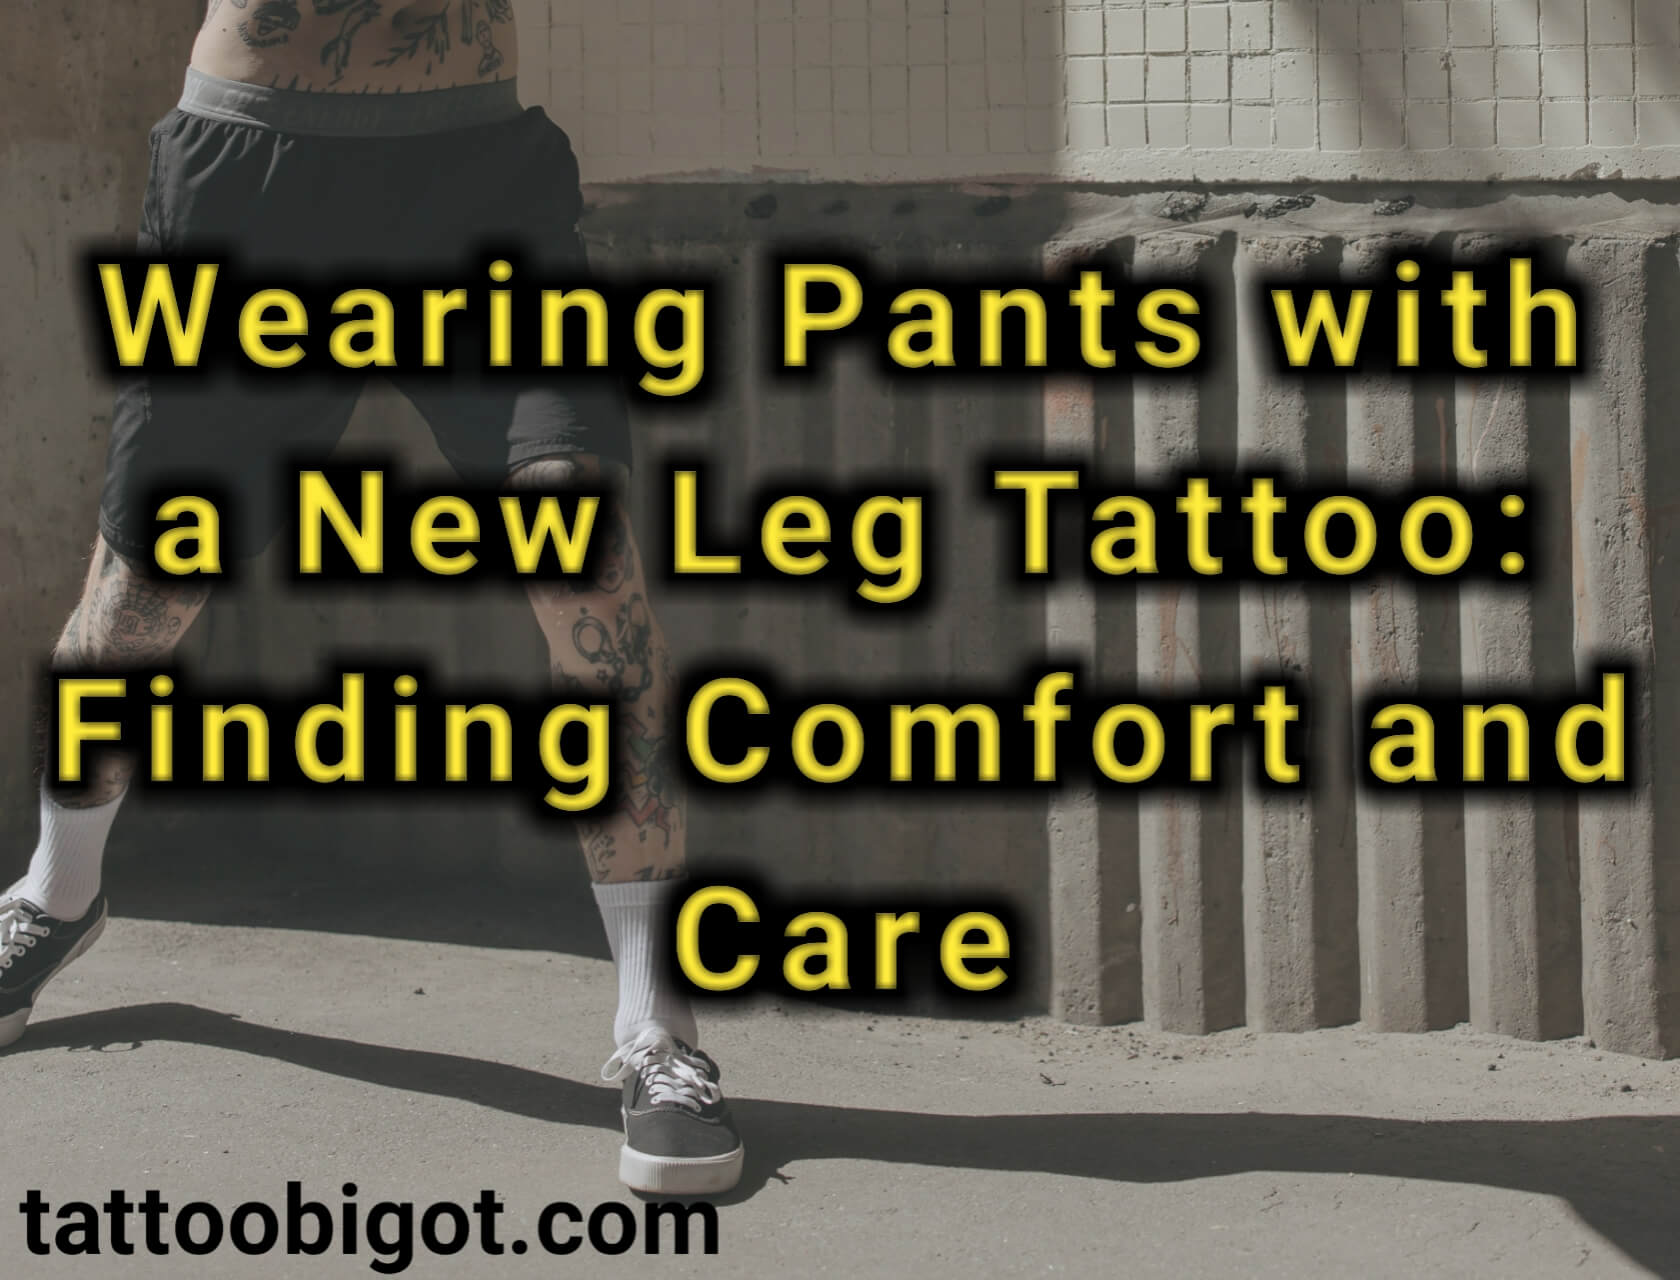 Wearing Pants with a New Leg Tattoo